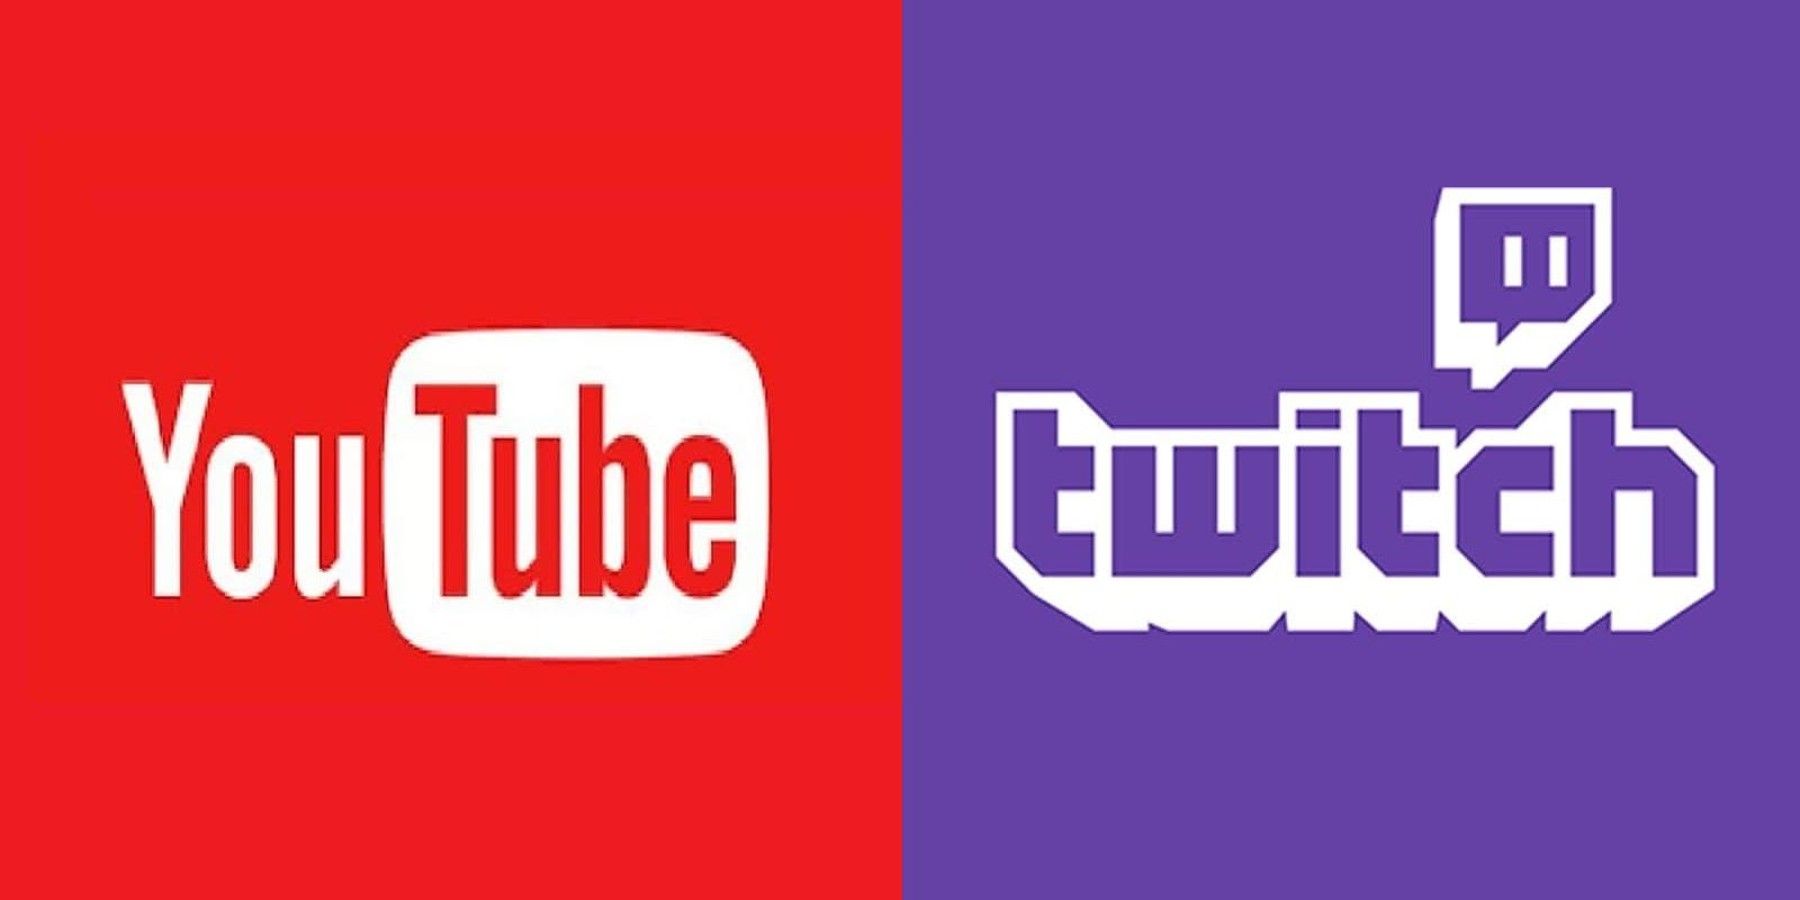 Report claims 99% of Twitch and 's top streamers are men - Dexerto